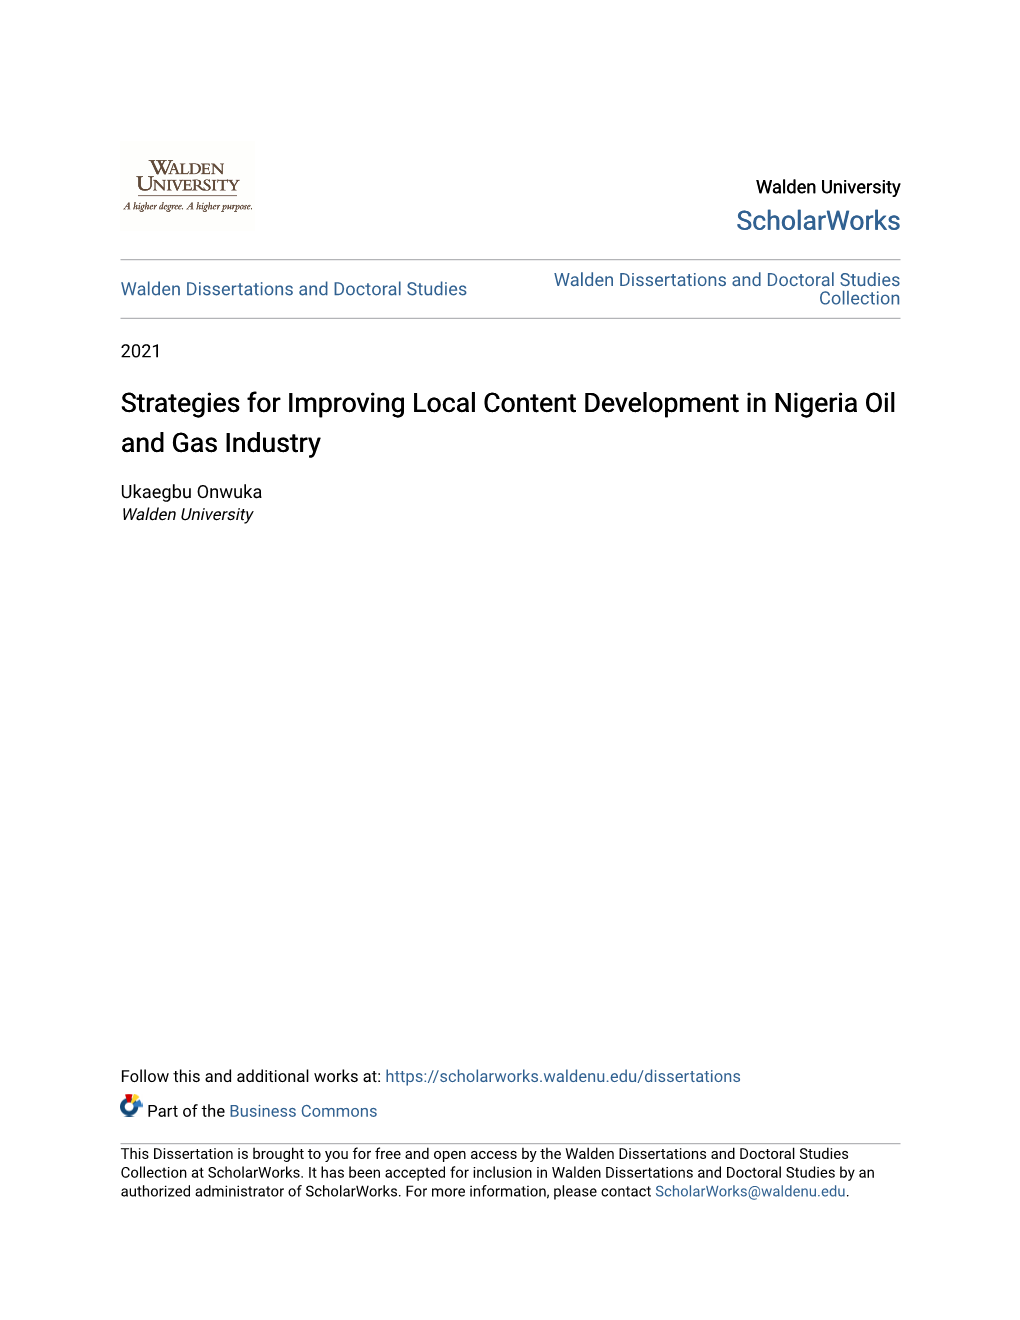 Strategies for Improving Local Content Development in Nigeria Oil and Gas Industry